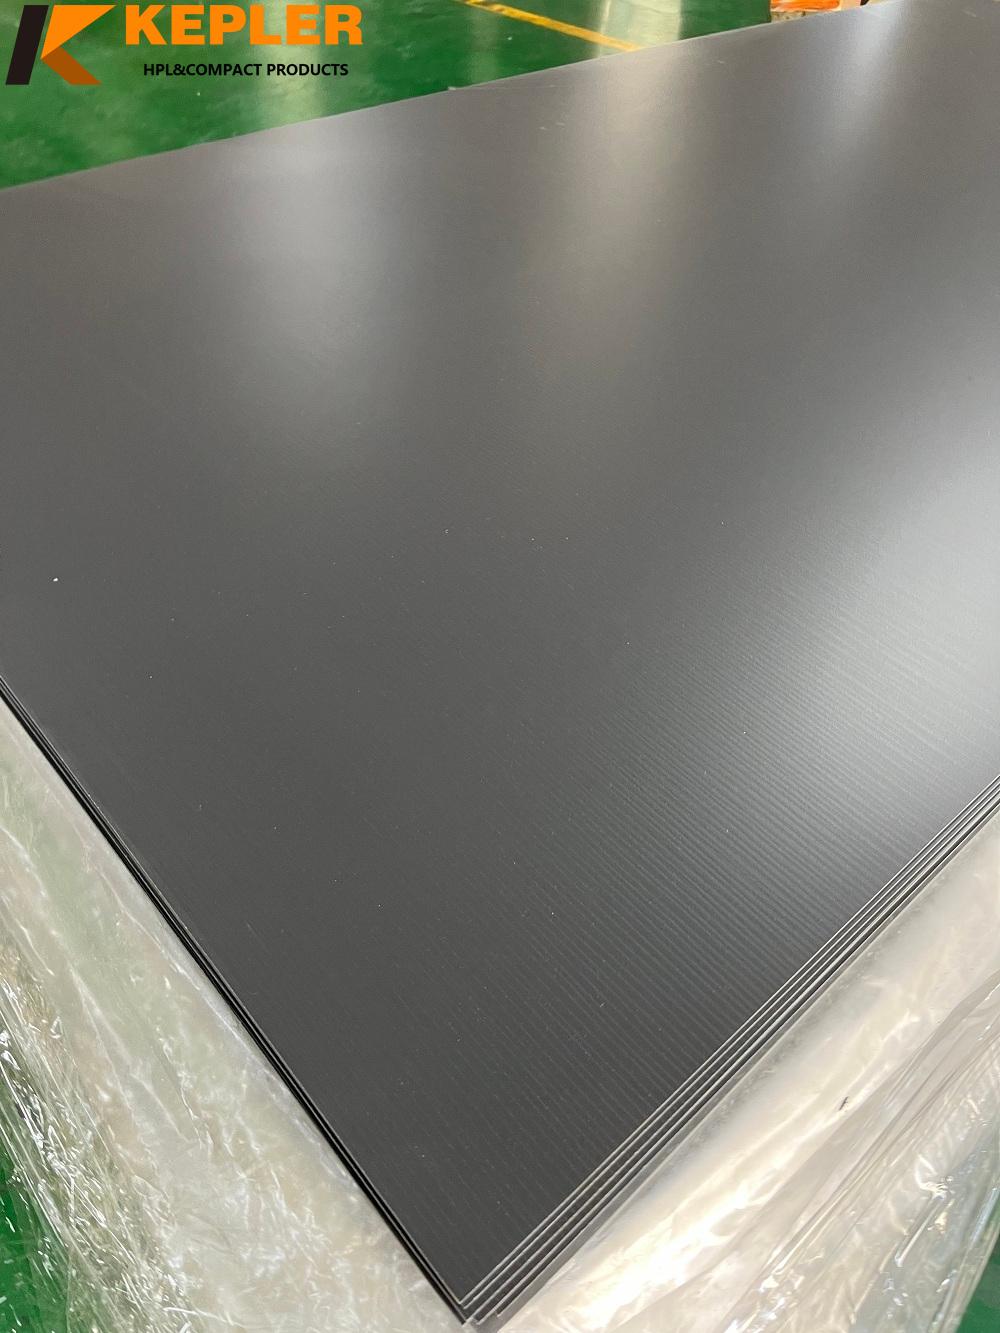 12mm Solid Color Fireproof Phenolic Resin HPL Compact Laminate Board